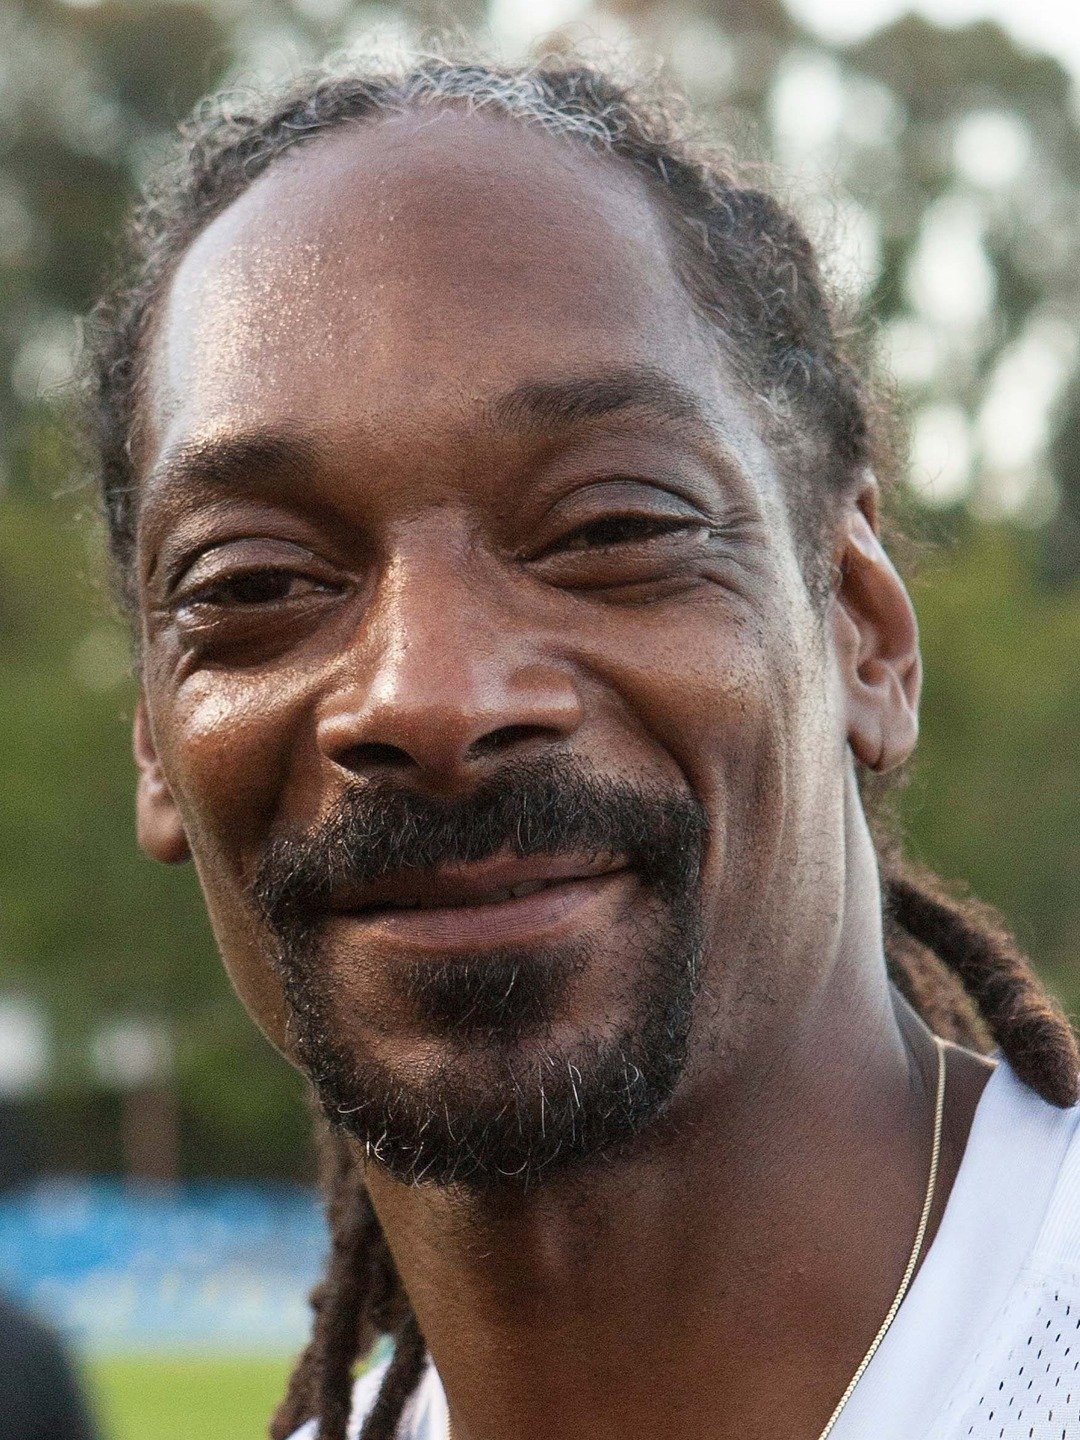 why did snoop dogg change his name to snoop lion